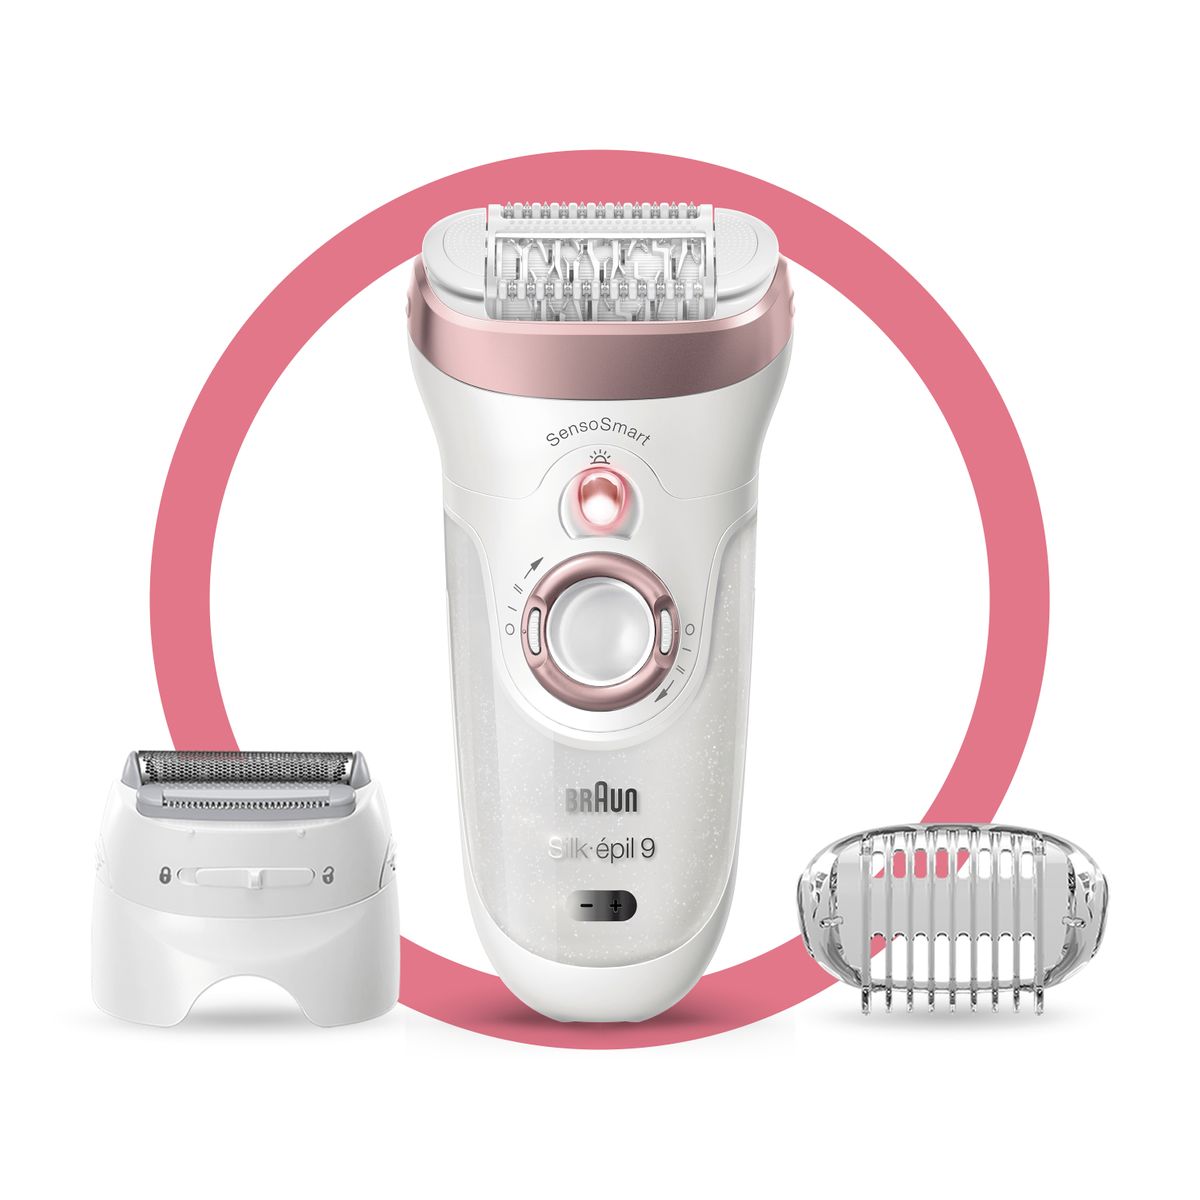 Braun Silk-epil 9 epilator ladies for hair removal, attachments for shaver and massage for body, bag, gift for women, 9-720, white/rose gold Single